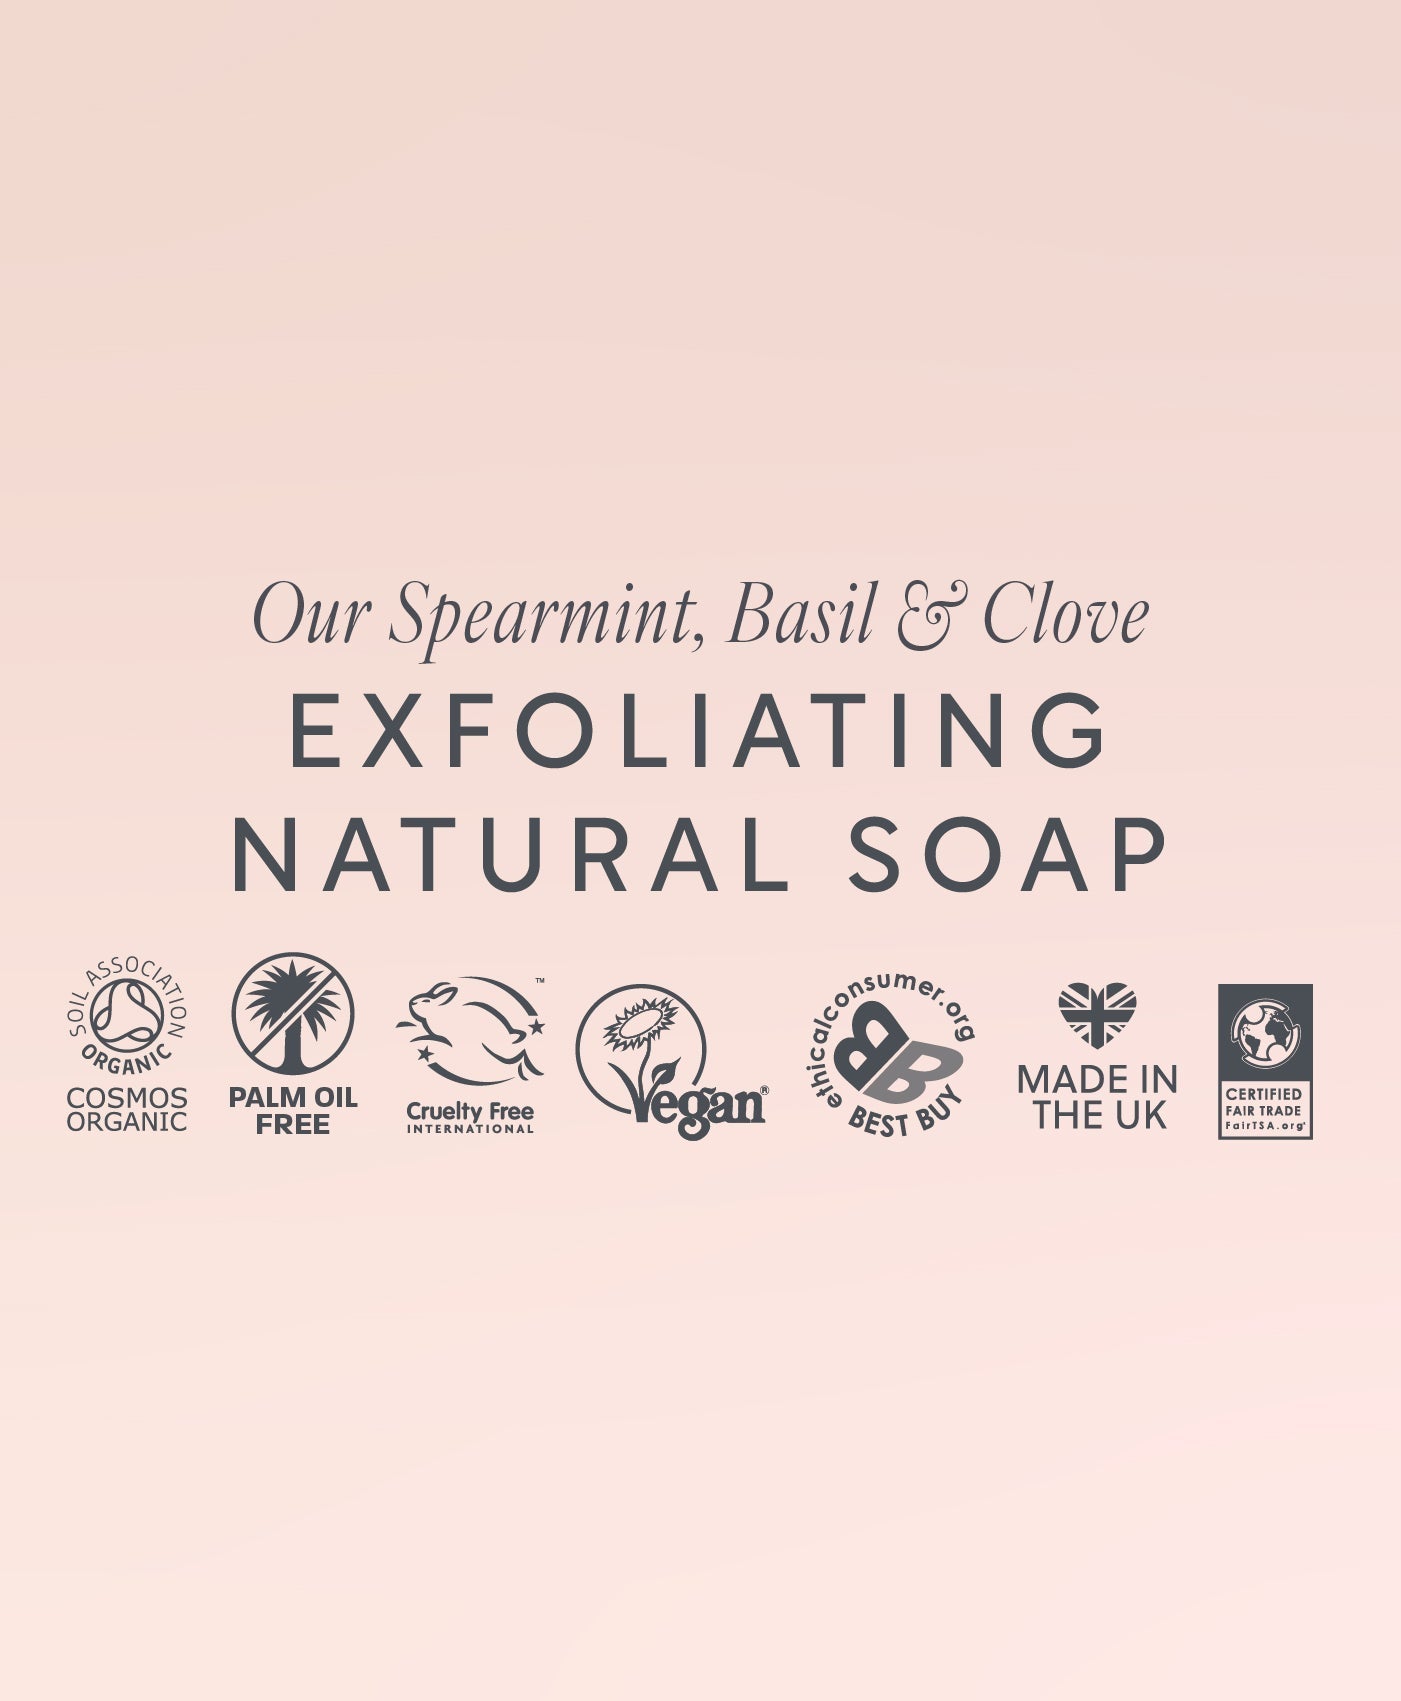 Natural and Organic Skincare from Lucy Bee